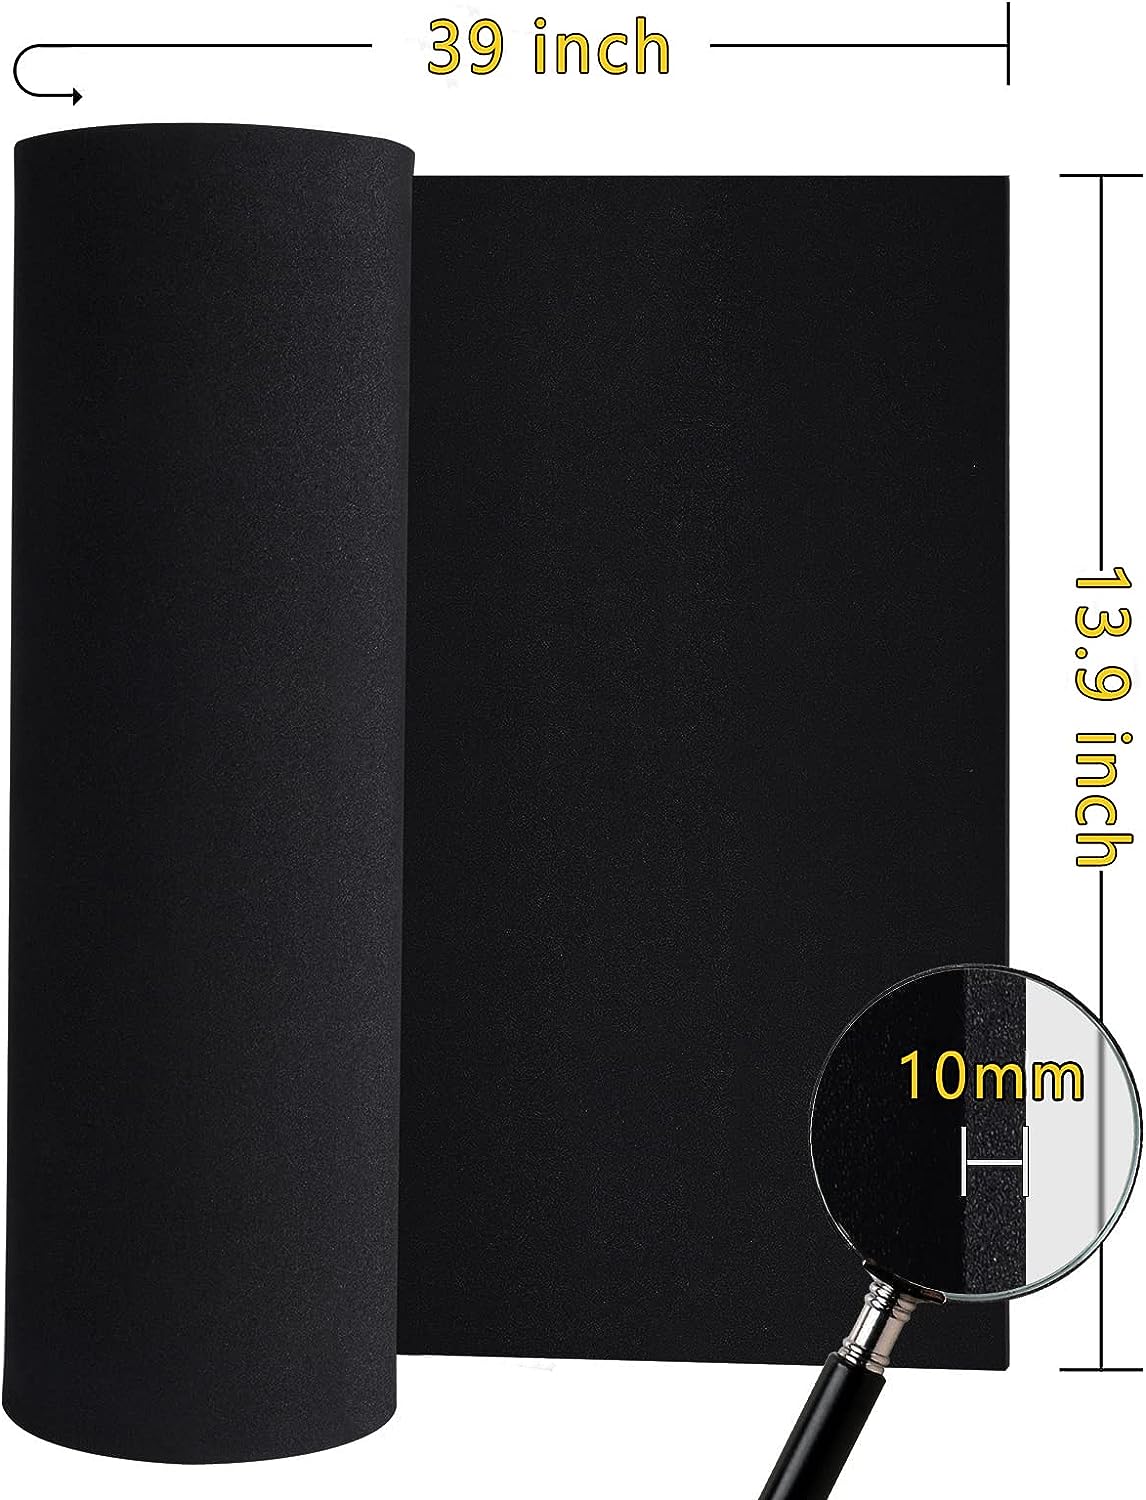 Black Eva Foam Cosplay Sheets Roll Premium Eva Craft Foam 10mm Thick 13.9" x 39" High Density 86kg/m3 For Cosplay Costume Crafts DIY Projects By PAIDU